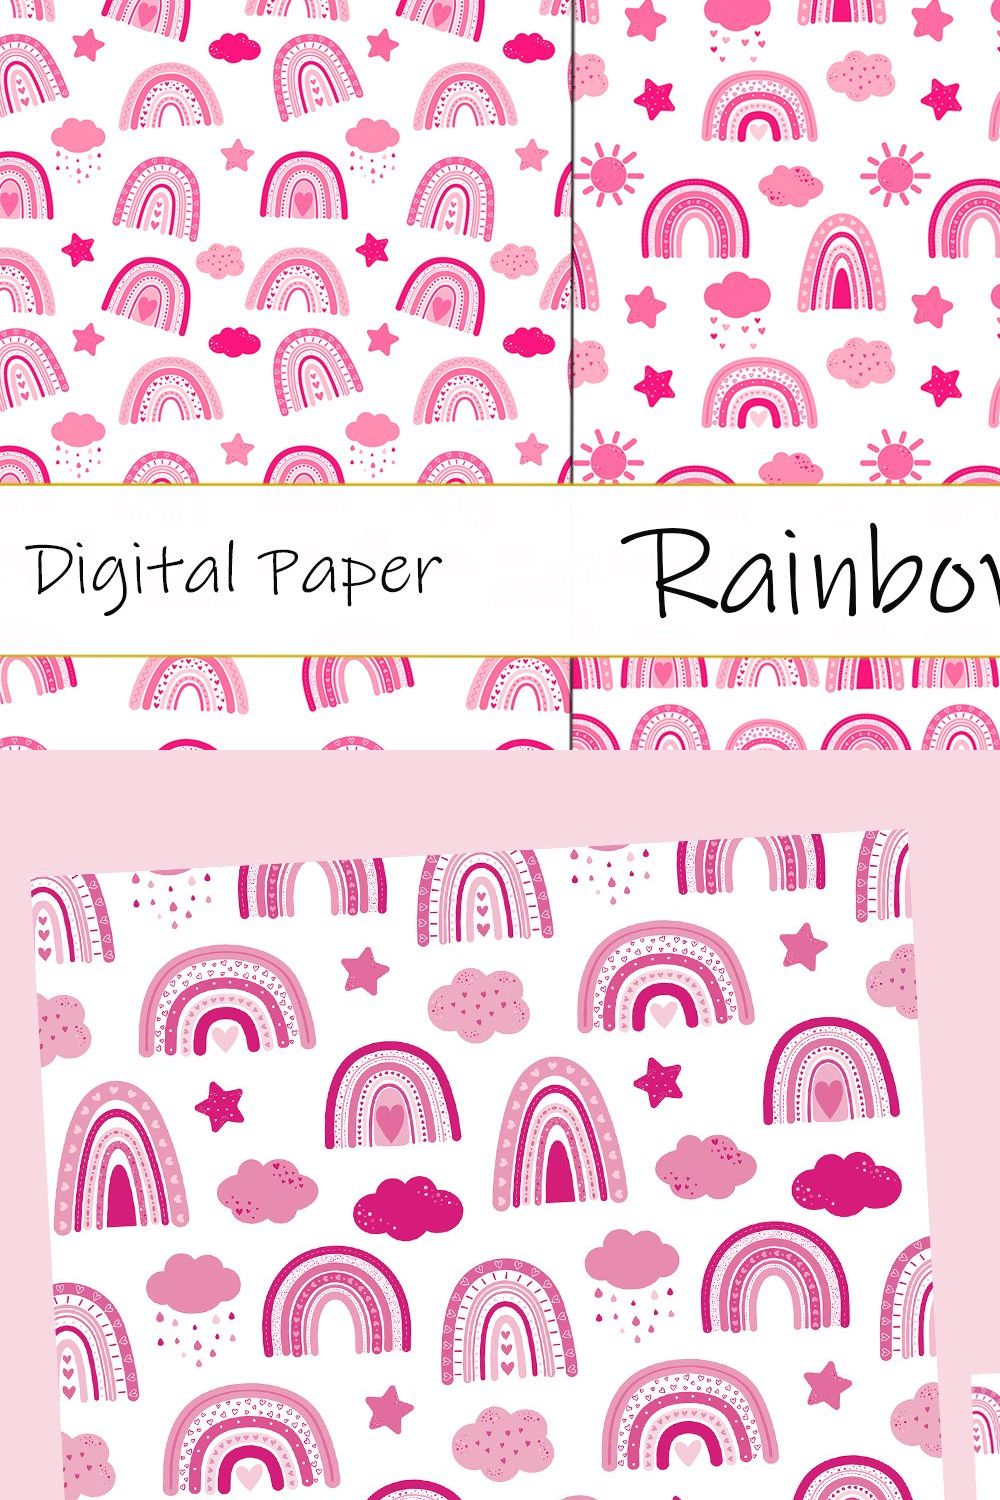 Rainbow Valentine's Day patterns pinterest preview image.